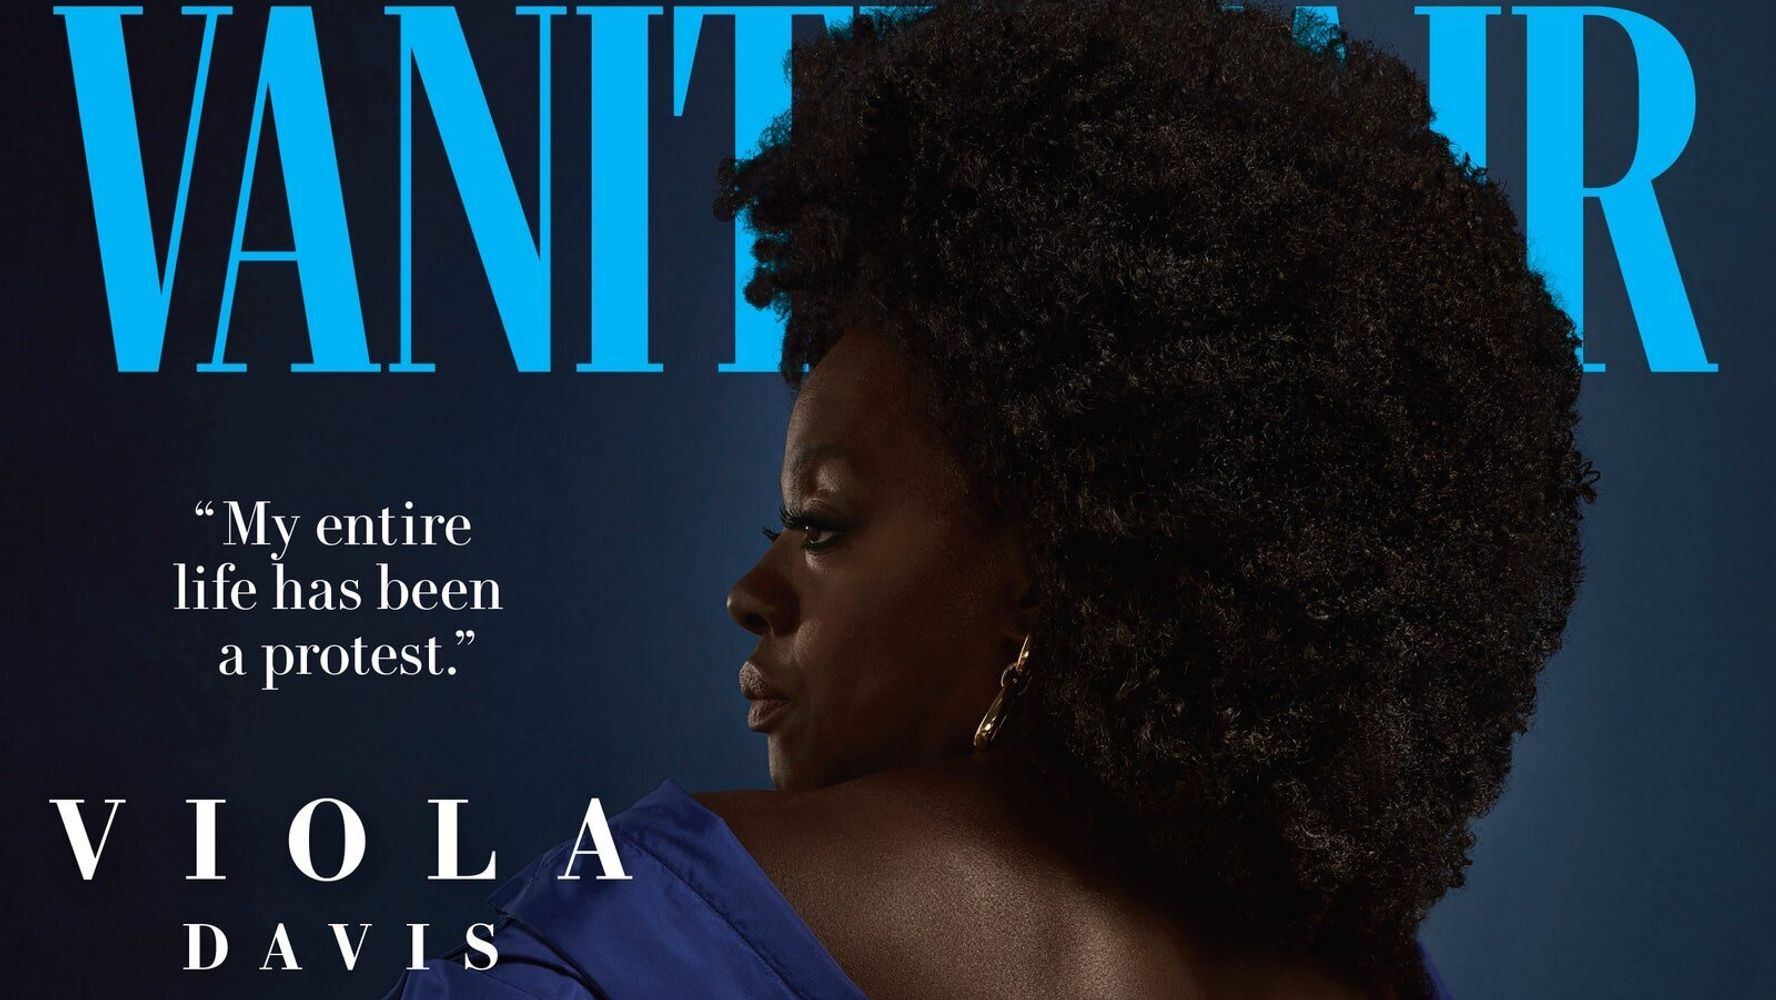 Vogue and Vanity Fair covers featuring Simone Biles and Viola